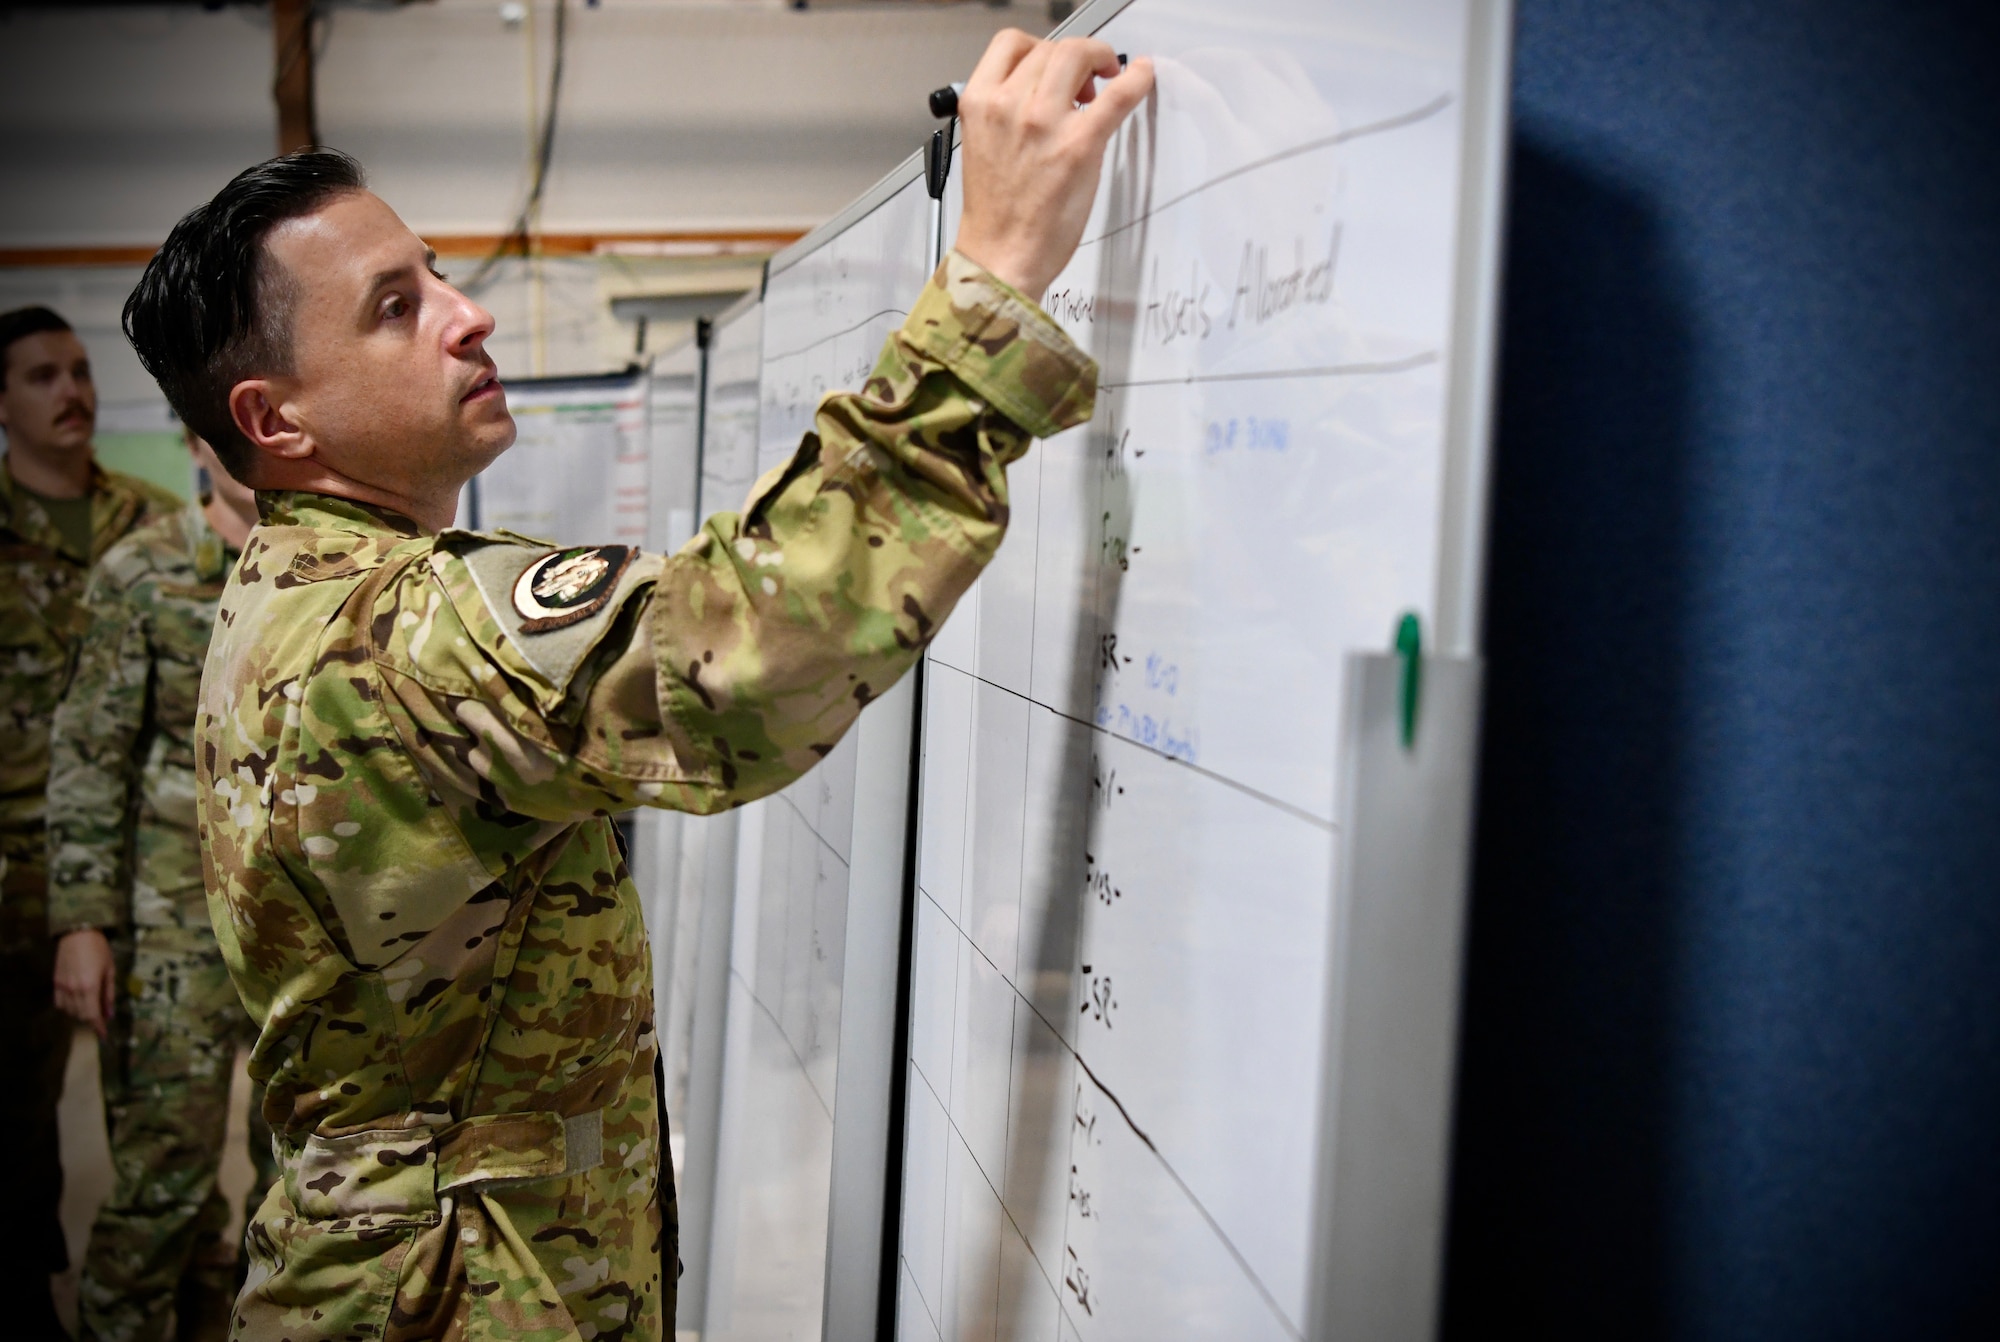 A Special Operation Task Group (SOTG) Air Commando, prepares a whiteboard for a mission planning meeting during a certification exercise (CERTEX) Aug. 9, 2022 at Hurlburt Field, Florida. The SOTG is made of several Special Operations Task Units (SOTUs) that have achieved their peak mission readiness and are ready to deploy to a Joint Task Unit together, made of special operations forces from every branch of the U.S. military.